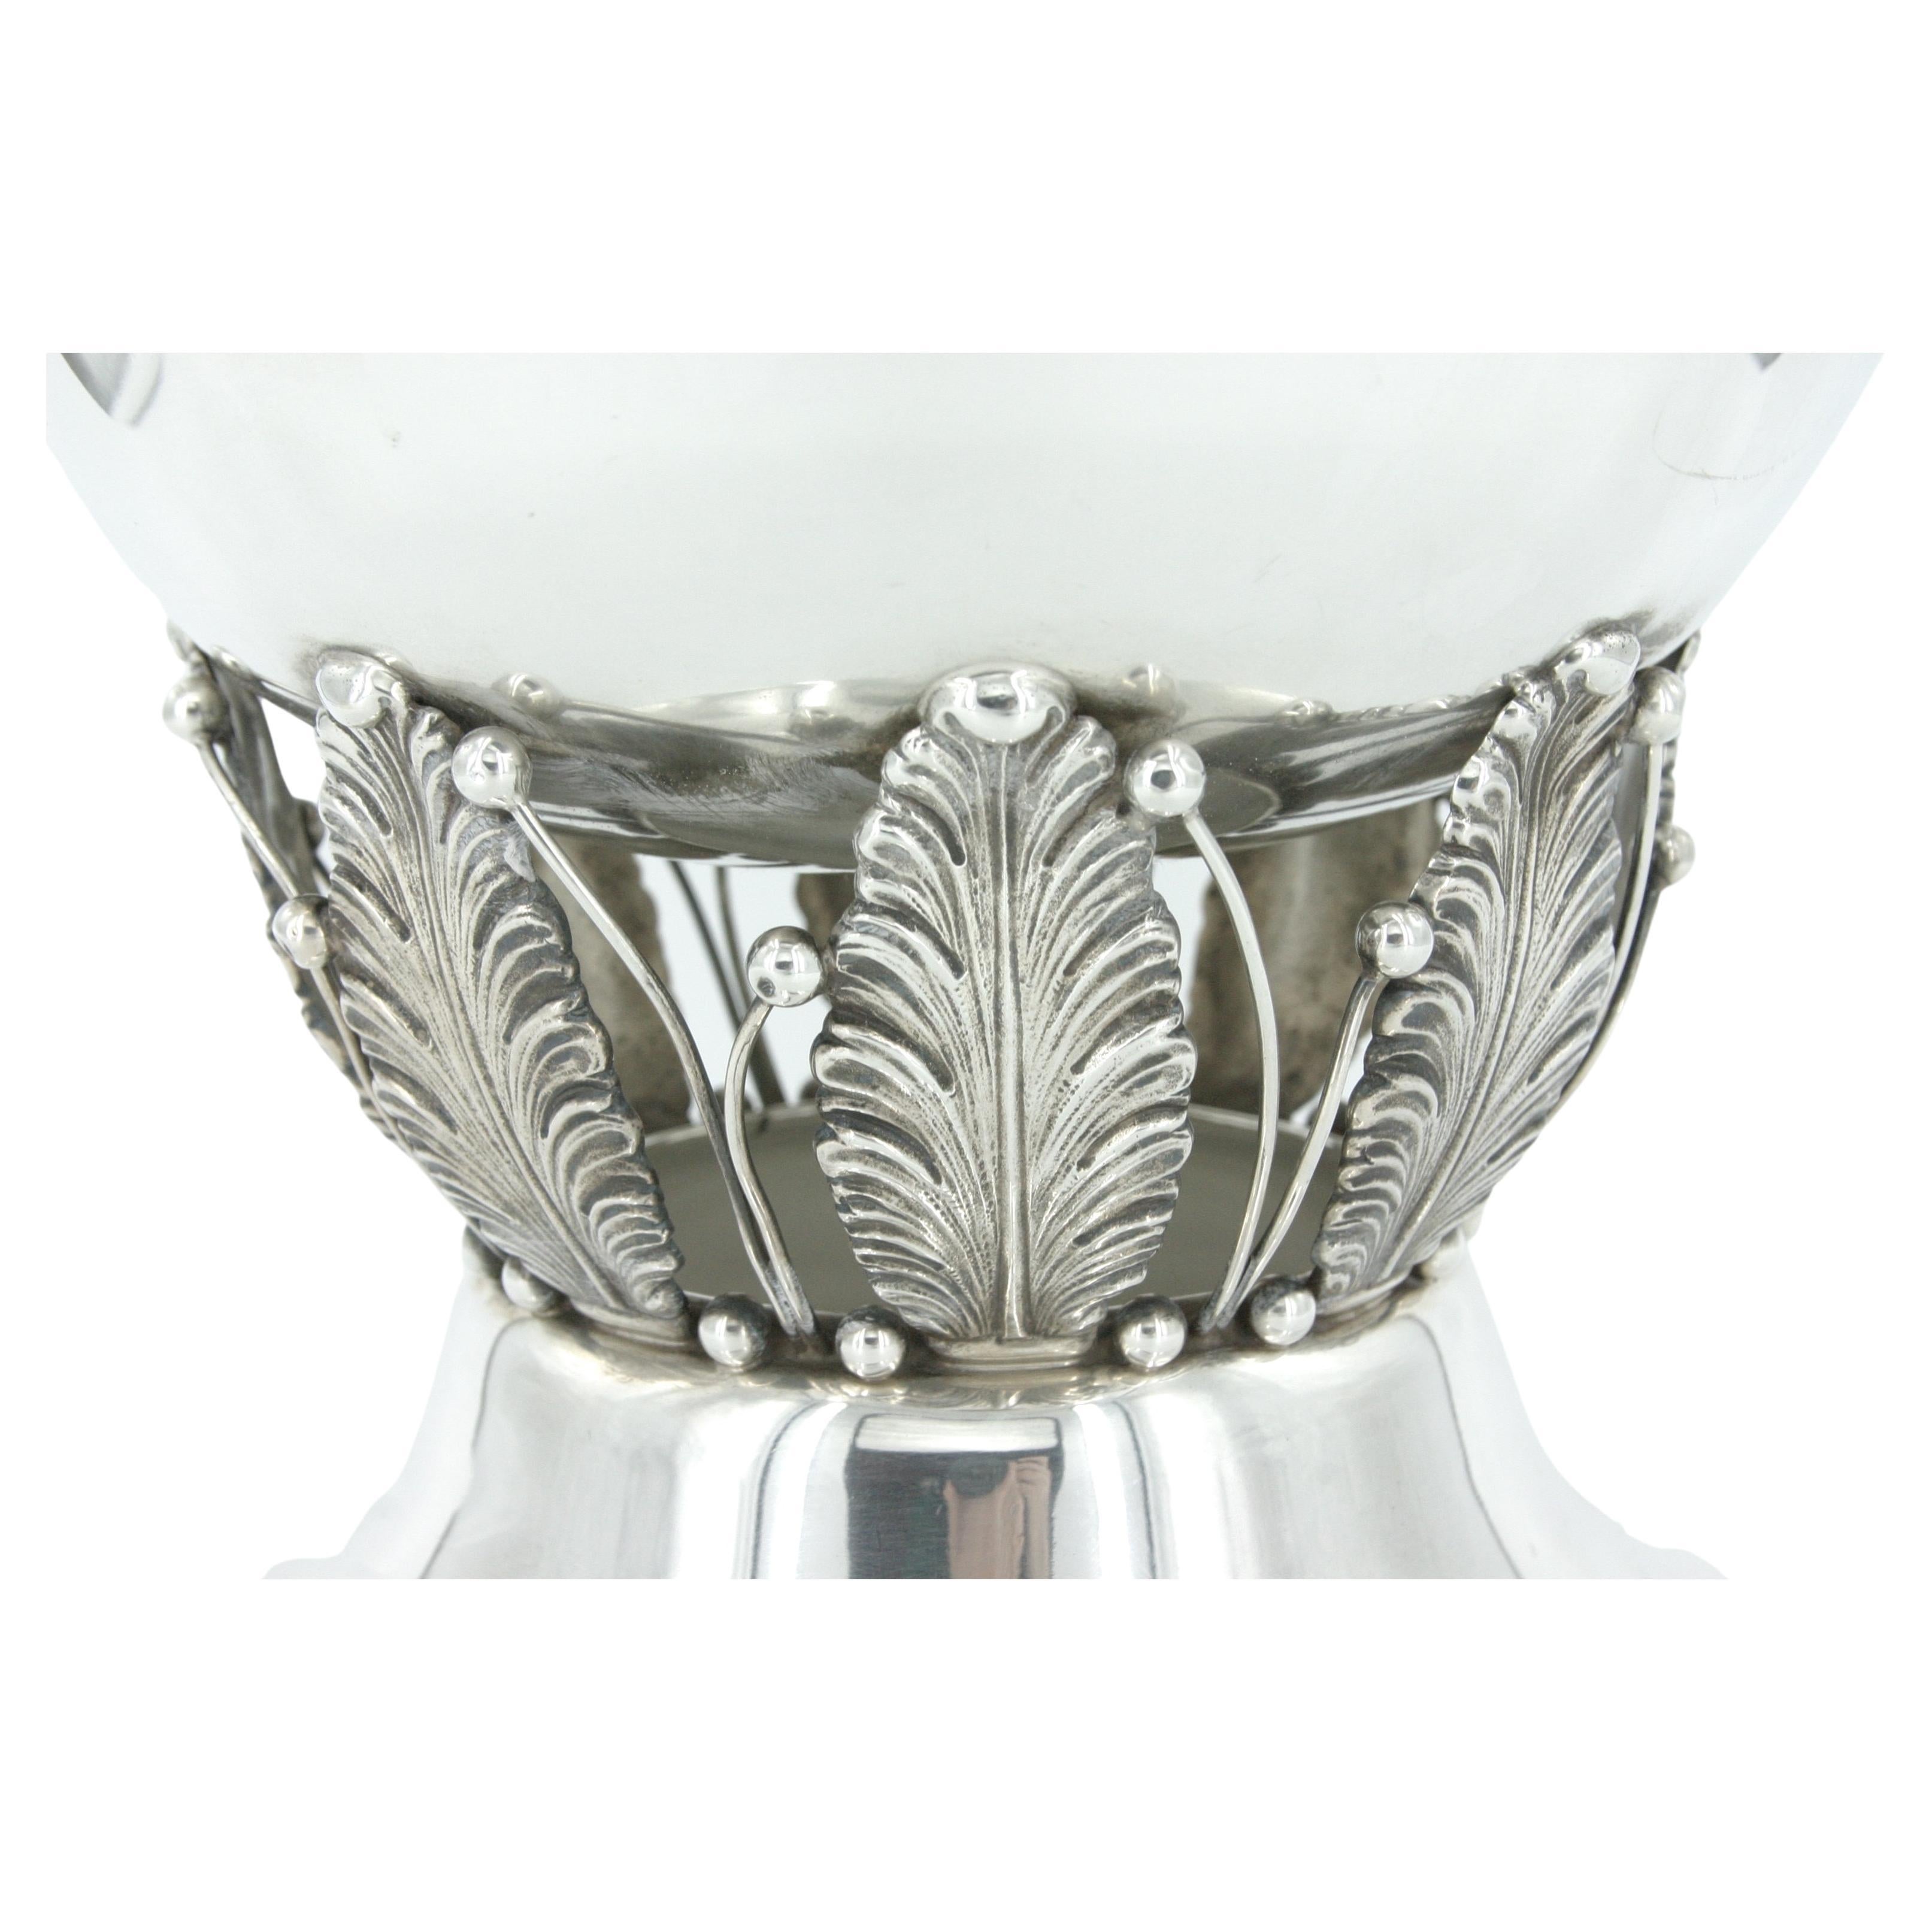 Large Sterling Silver Handled Punch Bowl For Sale 3